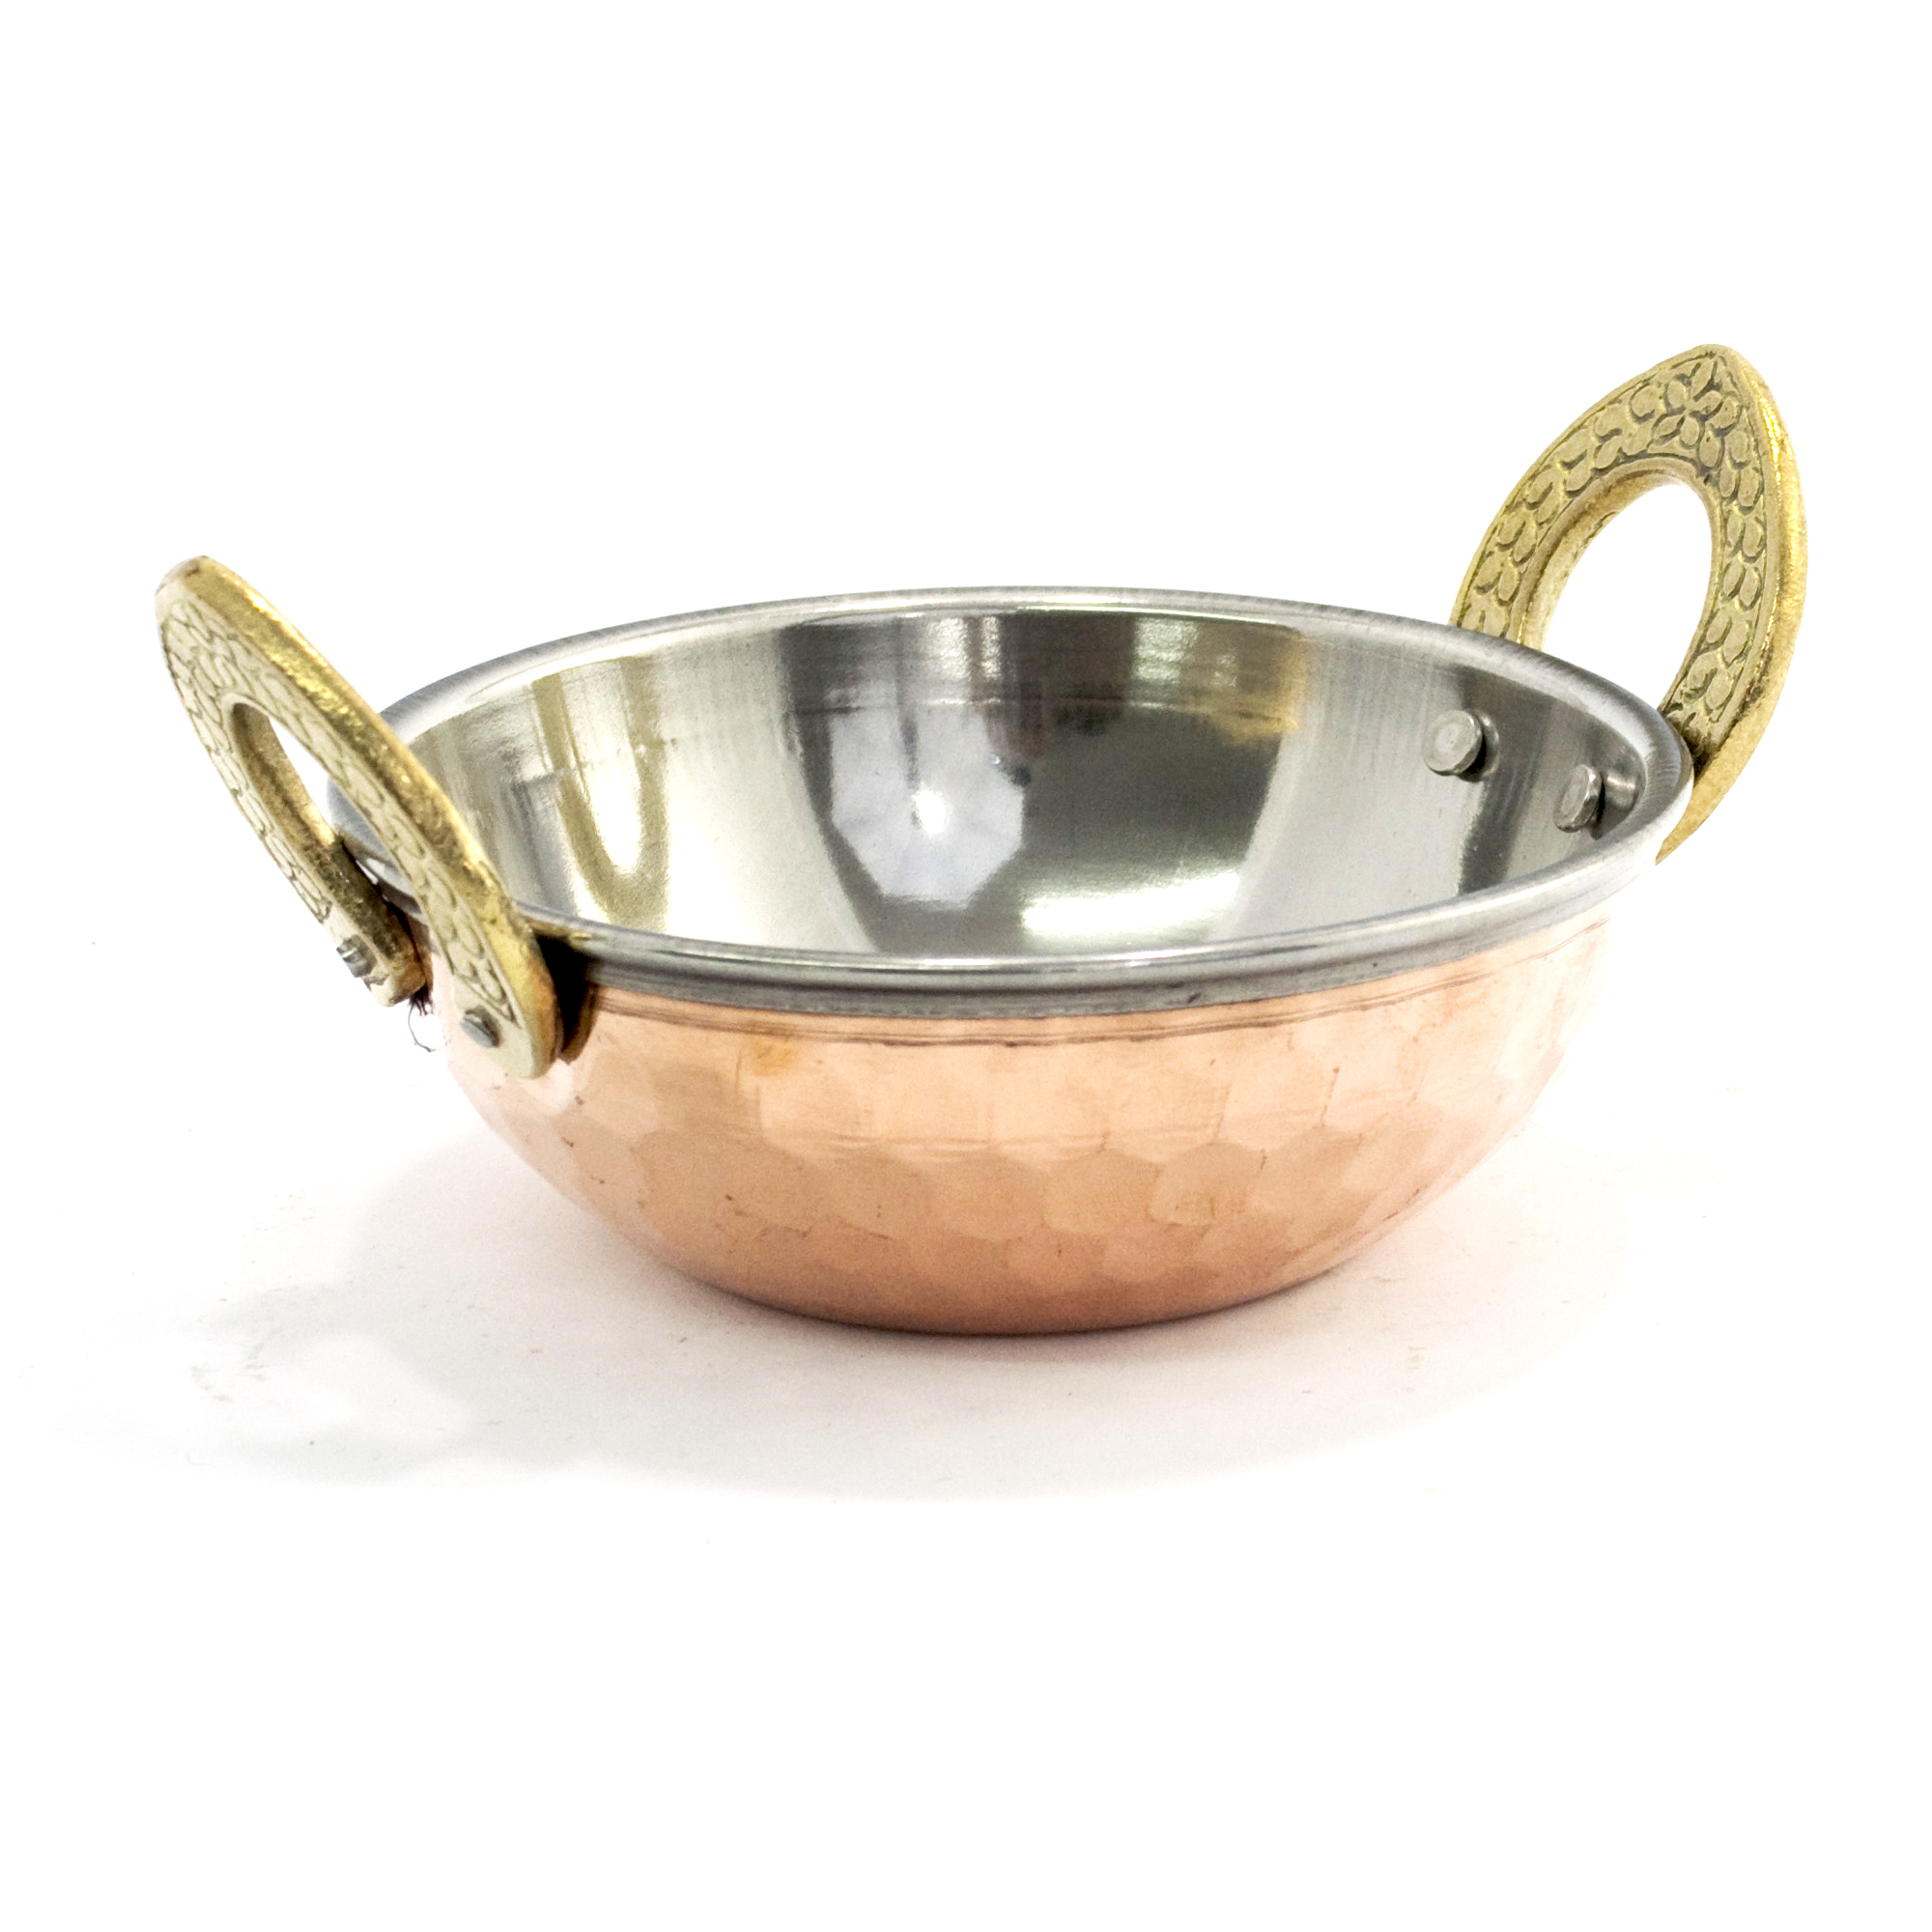 Indian Copper Plated Kadai/Balti Curry Serving Dish /Brass Handles 13cm 